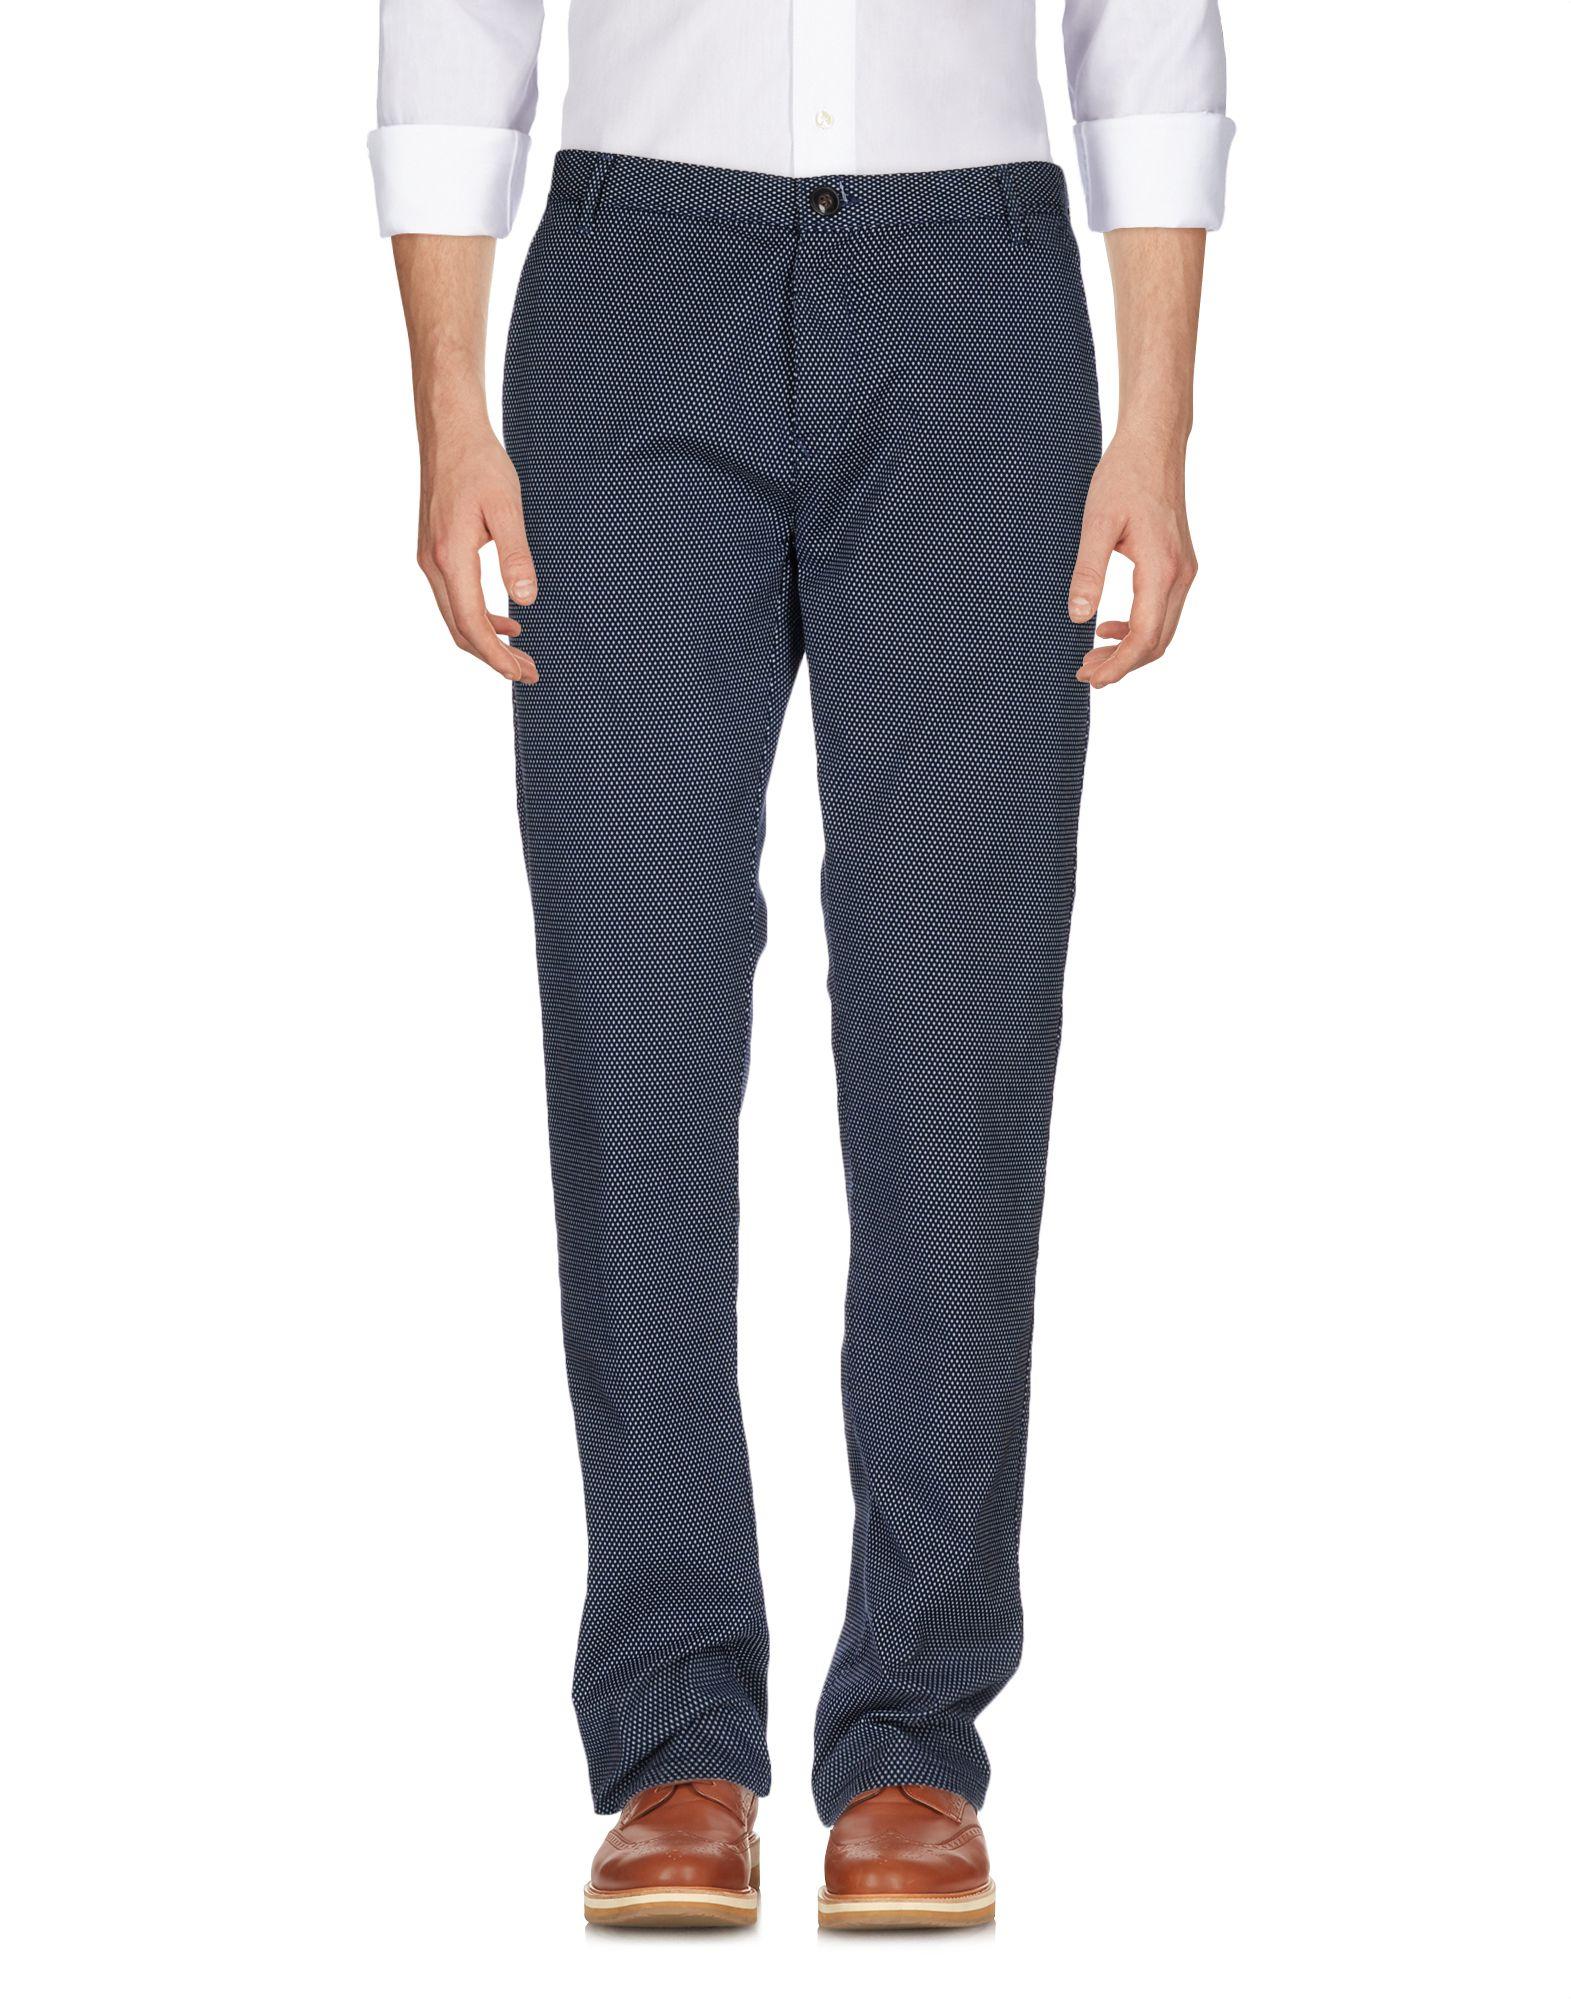 Lyst - Selected Casual Pants in Blue for Men - Save 75%